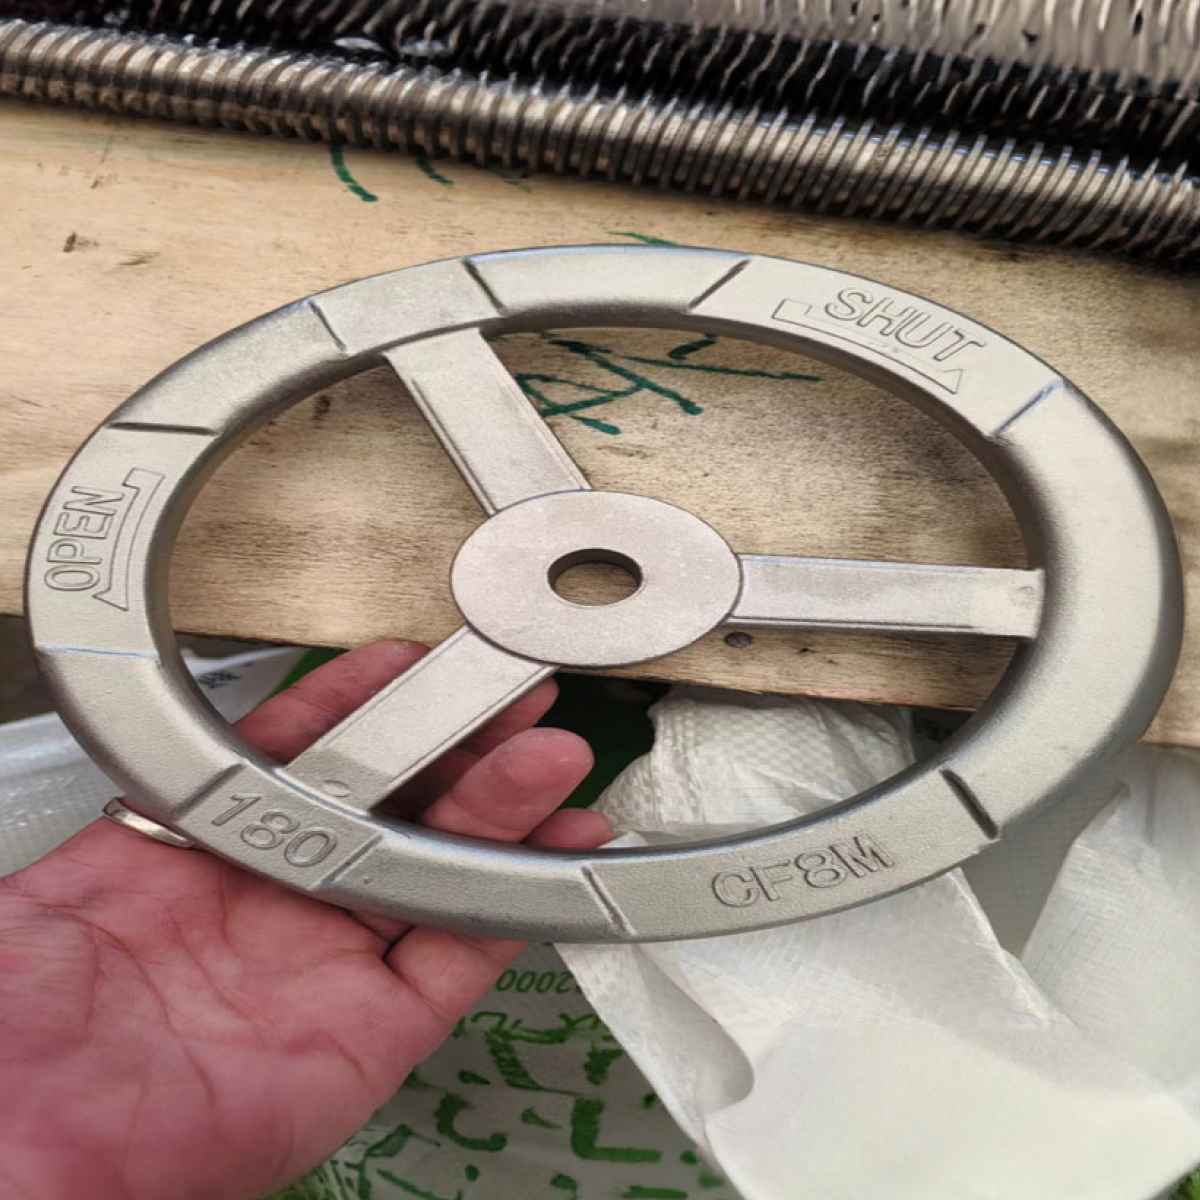 Image of a hand wheel with specifications and direction arrow to open and close.